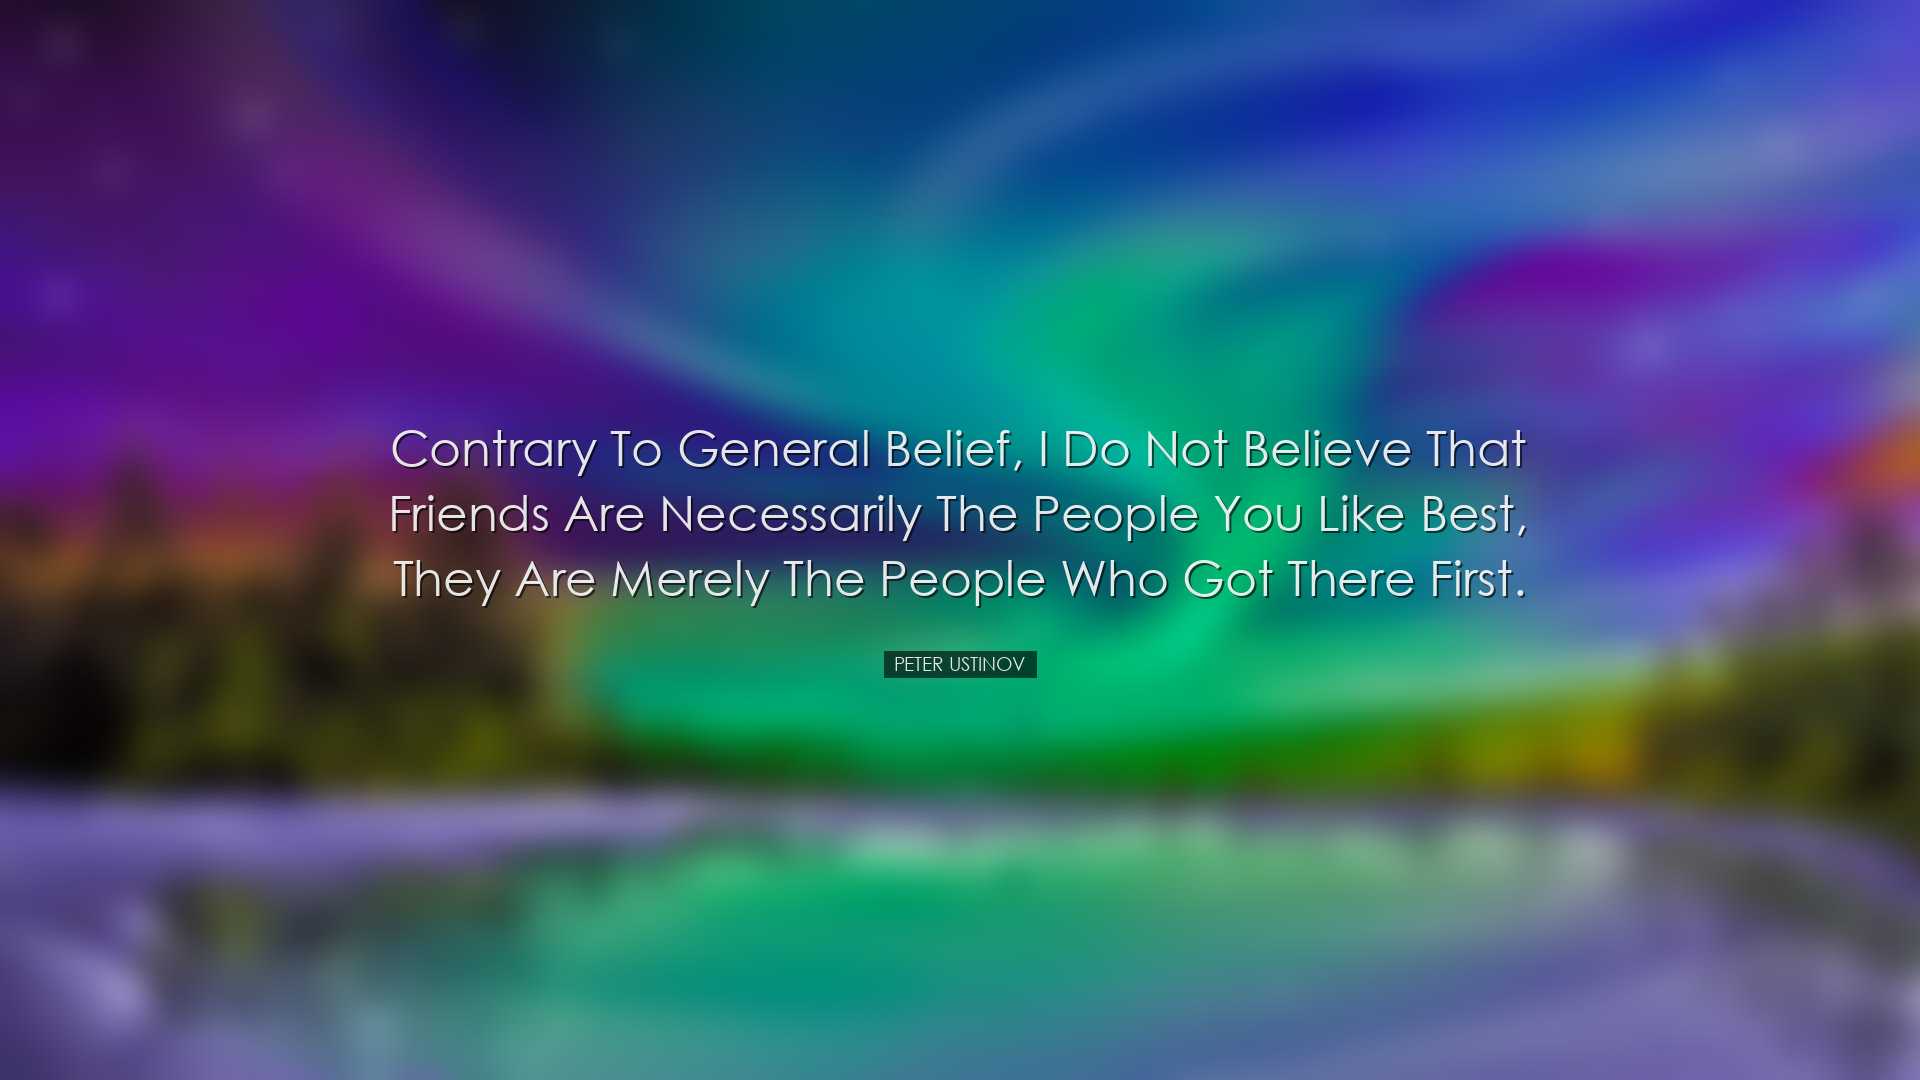 Contrary to general belief, I do not believe that friends are nece